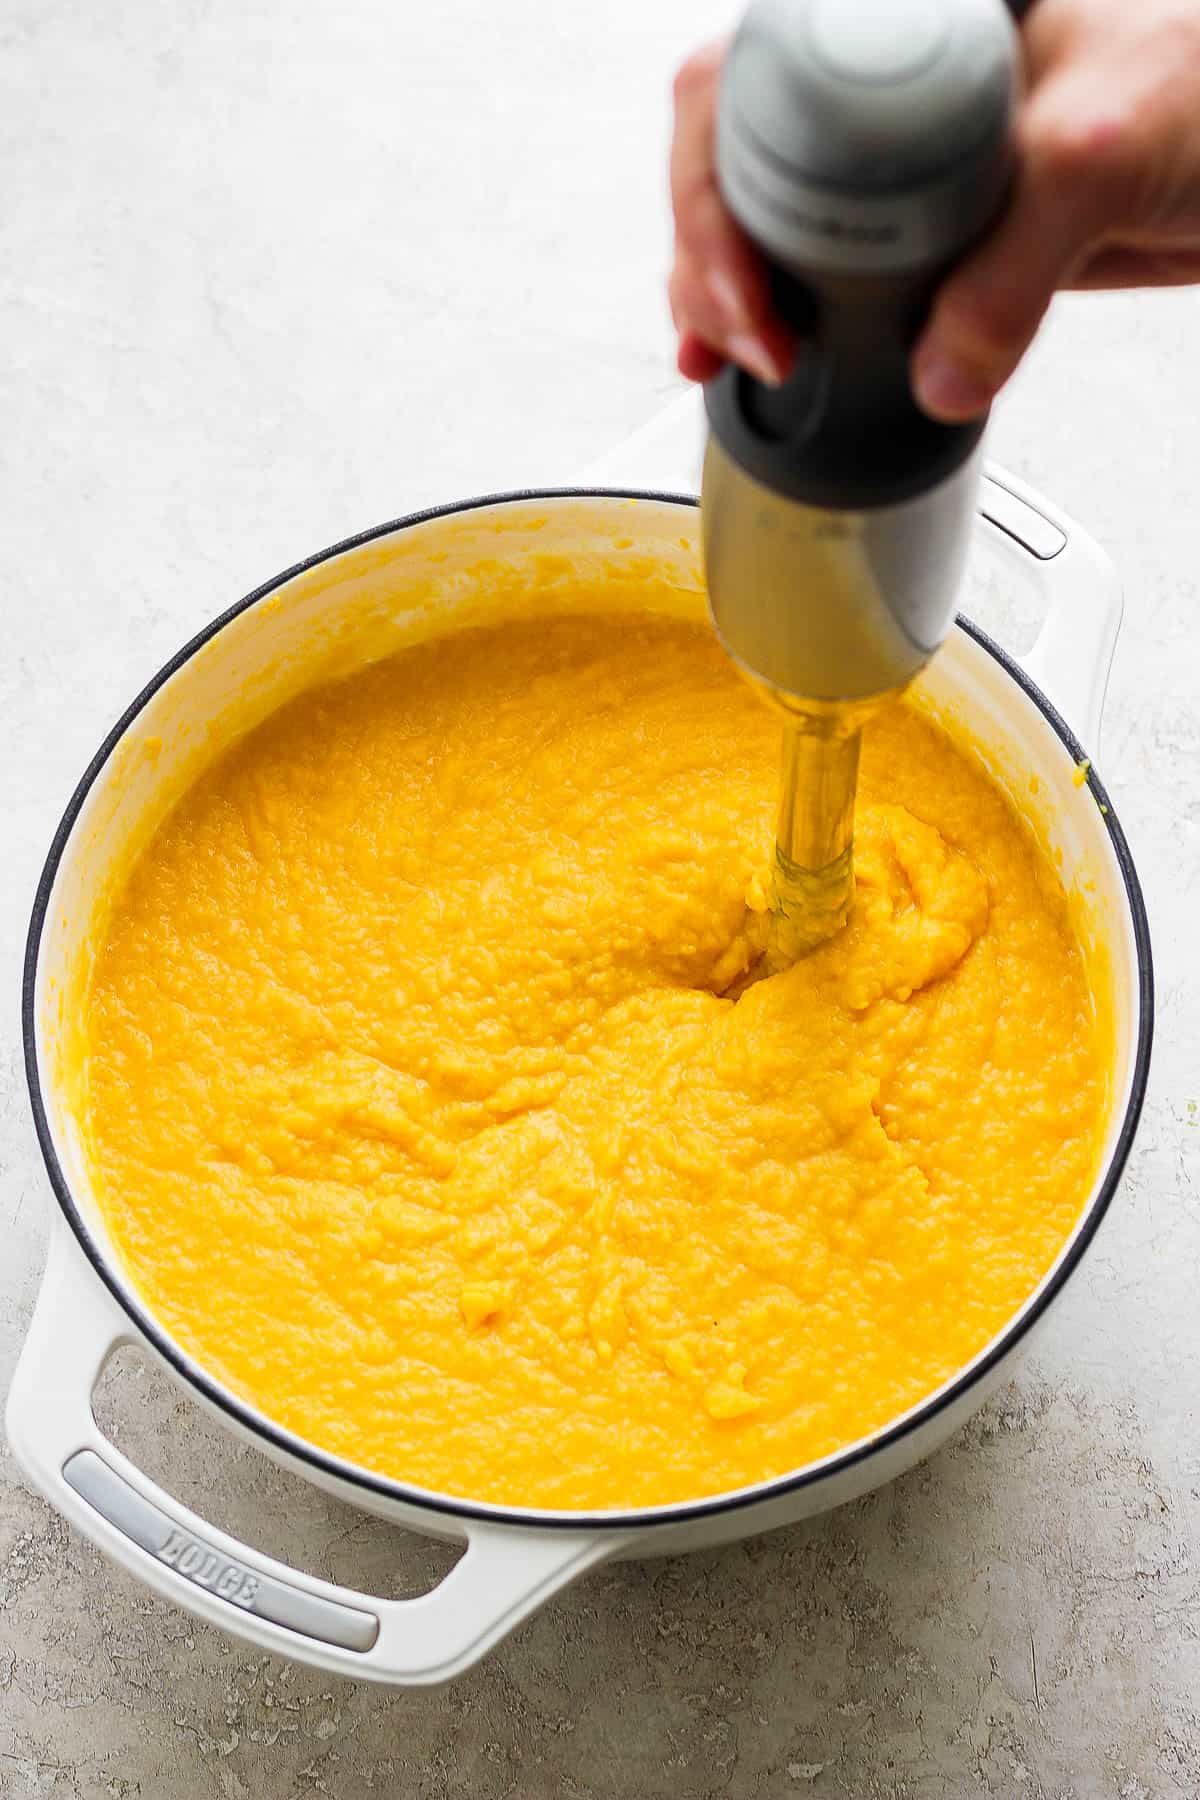 Pumpkin soup ingredients being blended by an immersion blender.